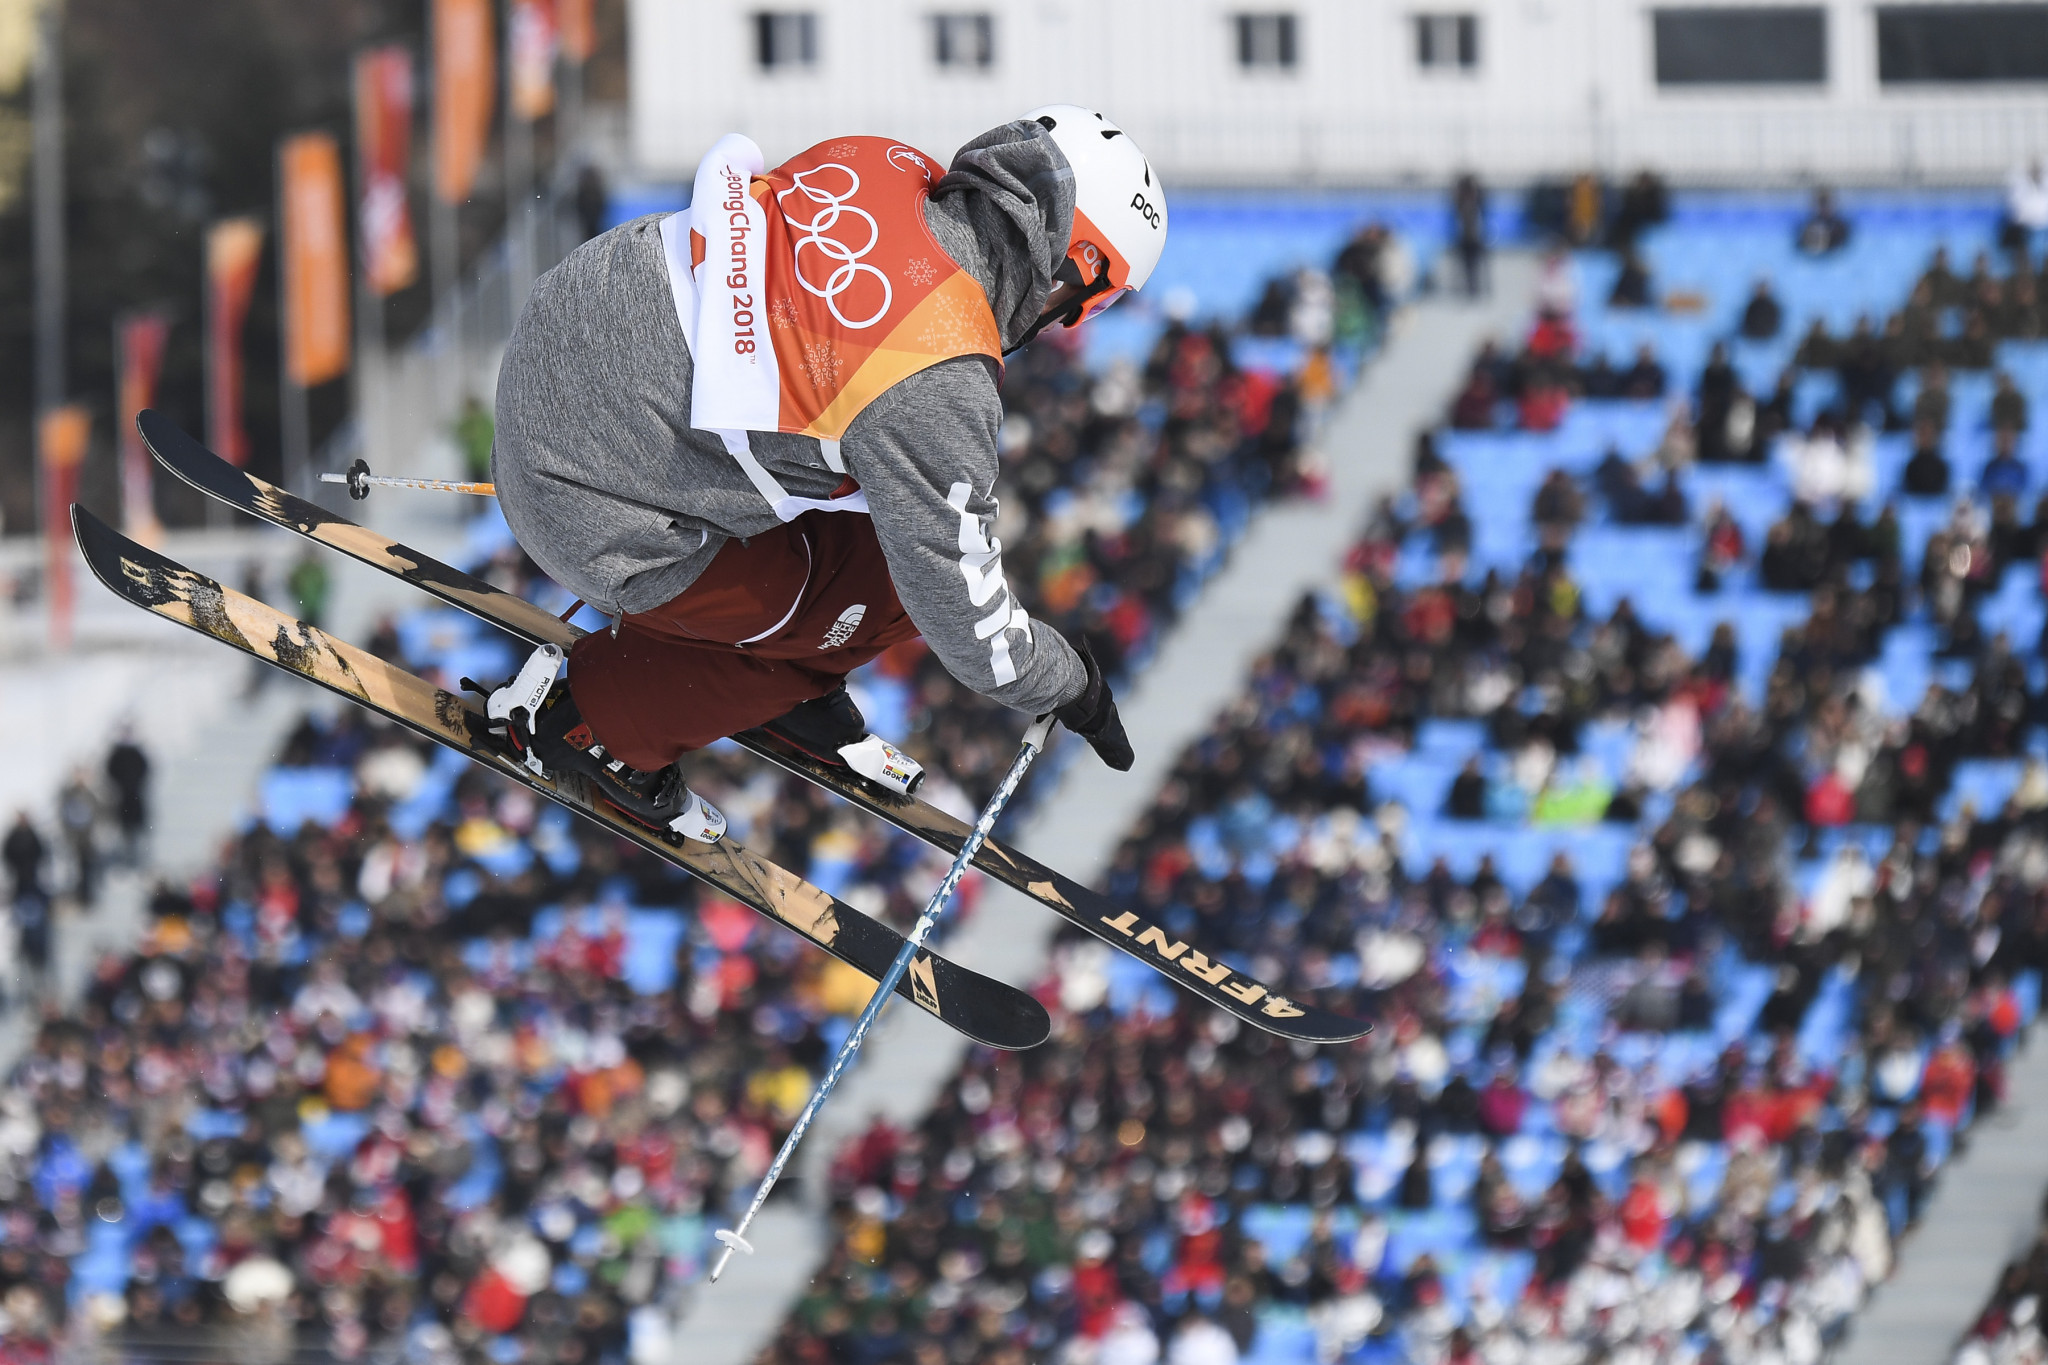 Alex Ferreira’s third-run score of 96.40 points earned him the silver medal ©Getty Images